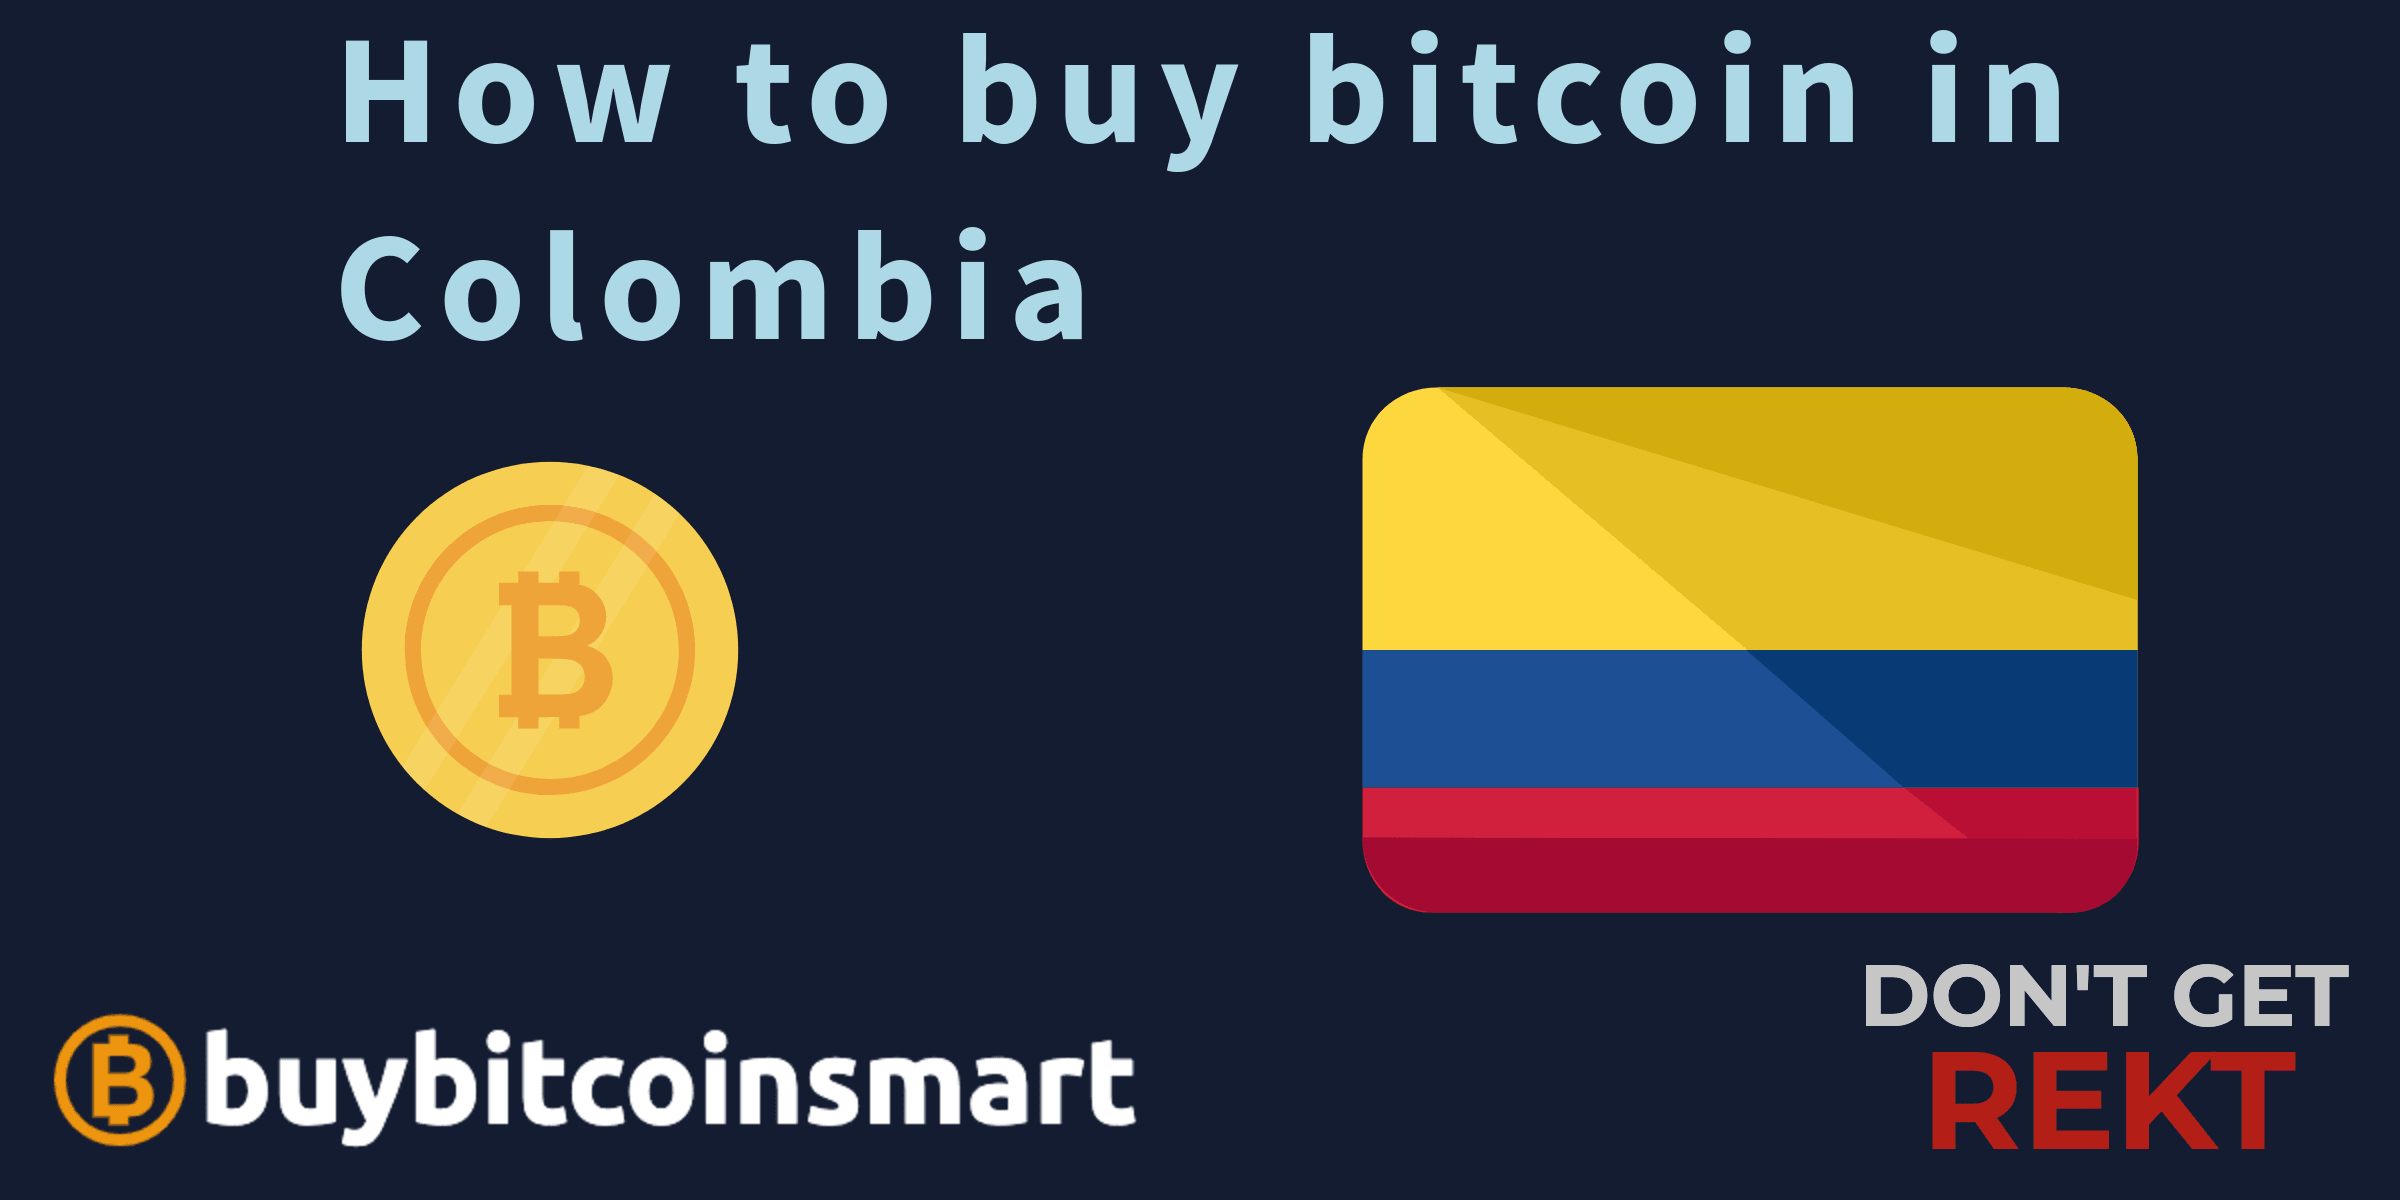 How to buy bitcoin in Colombia